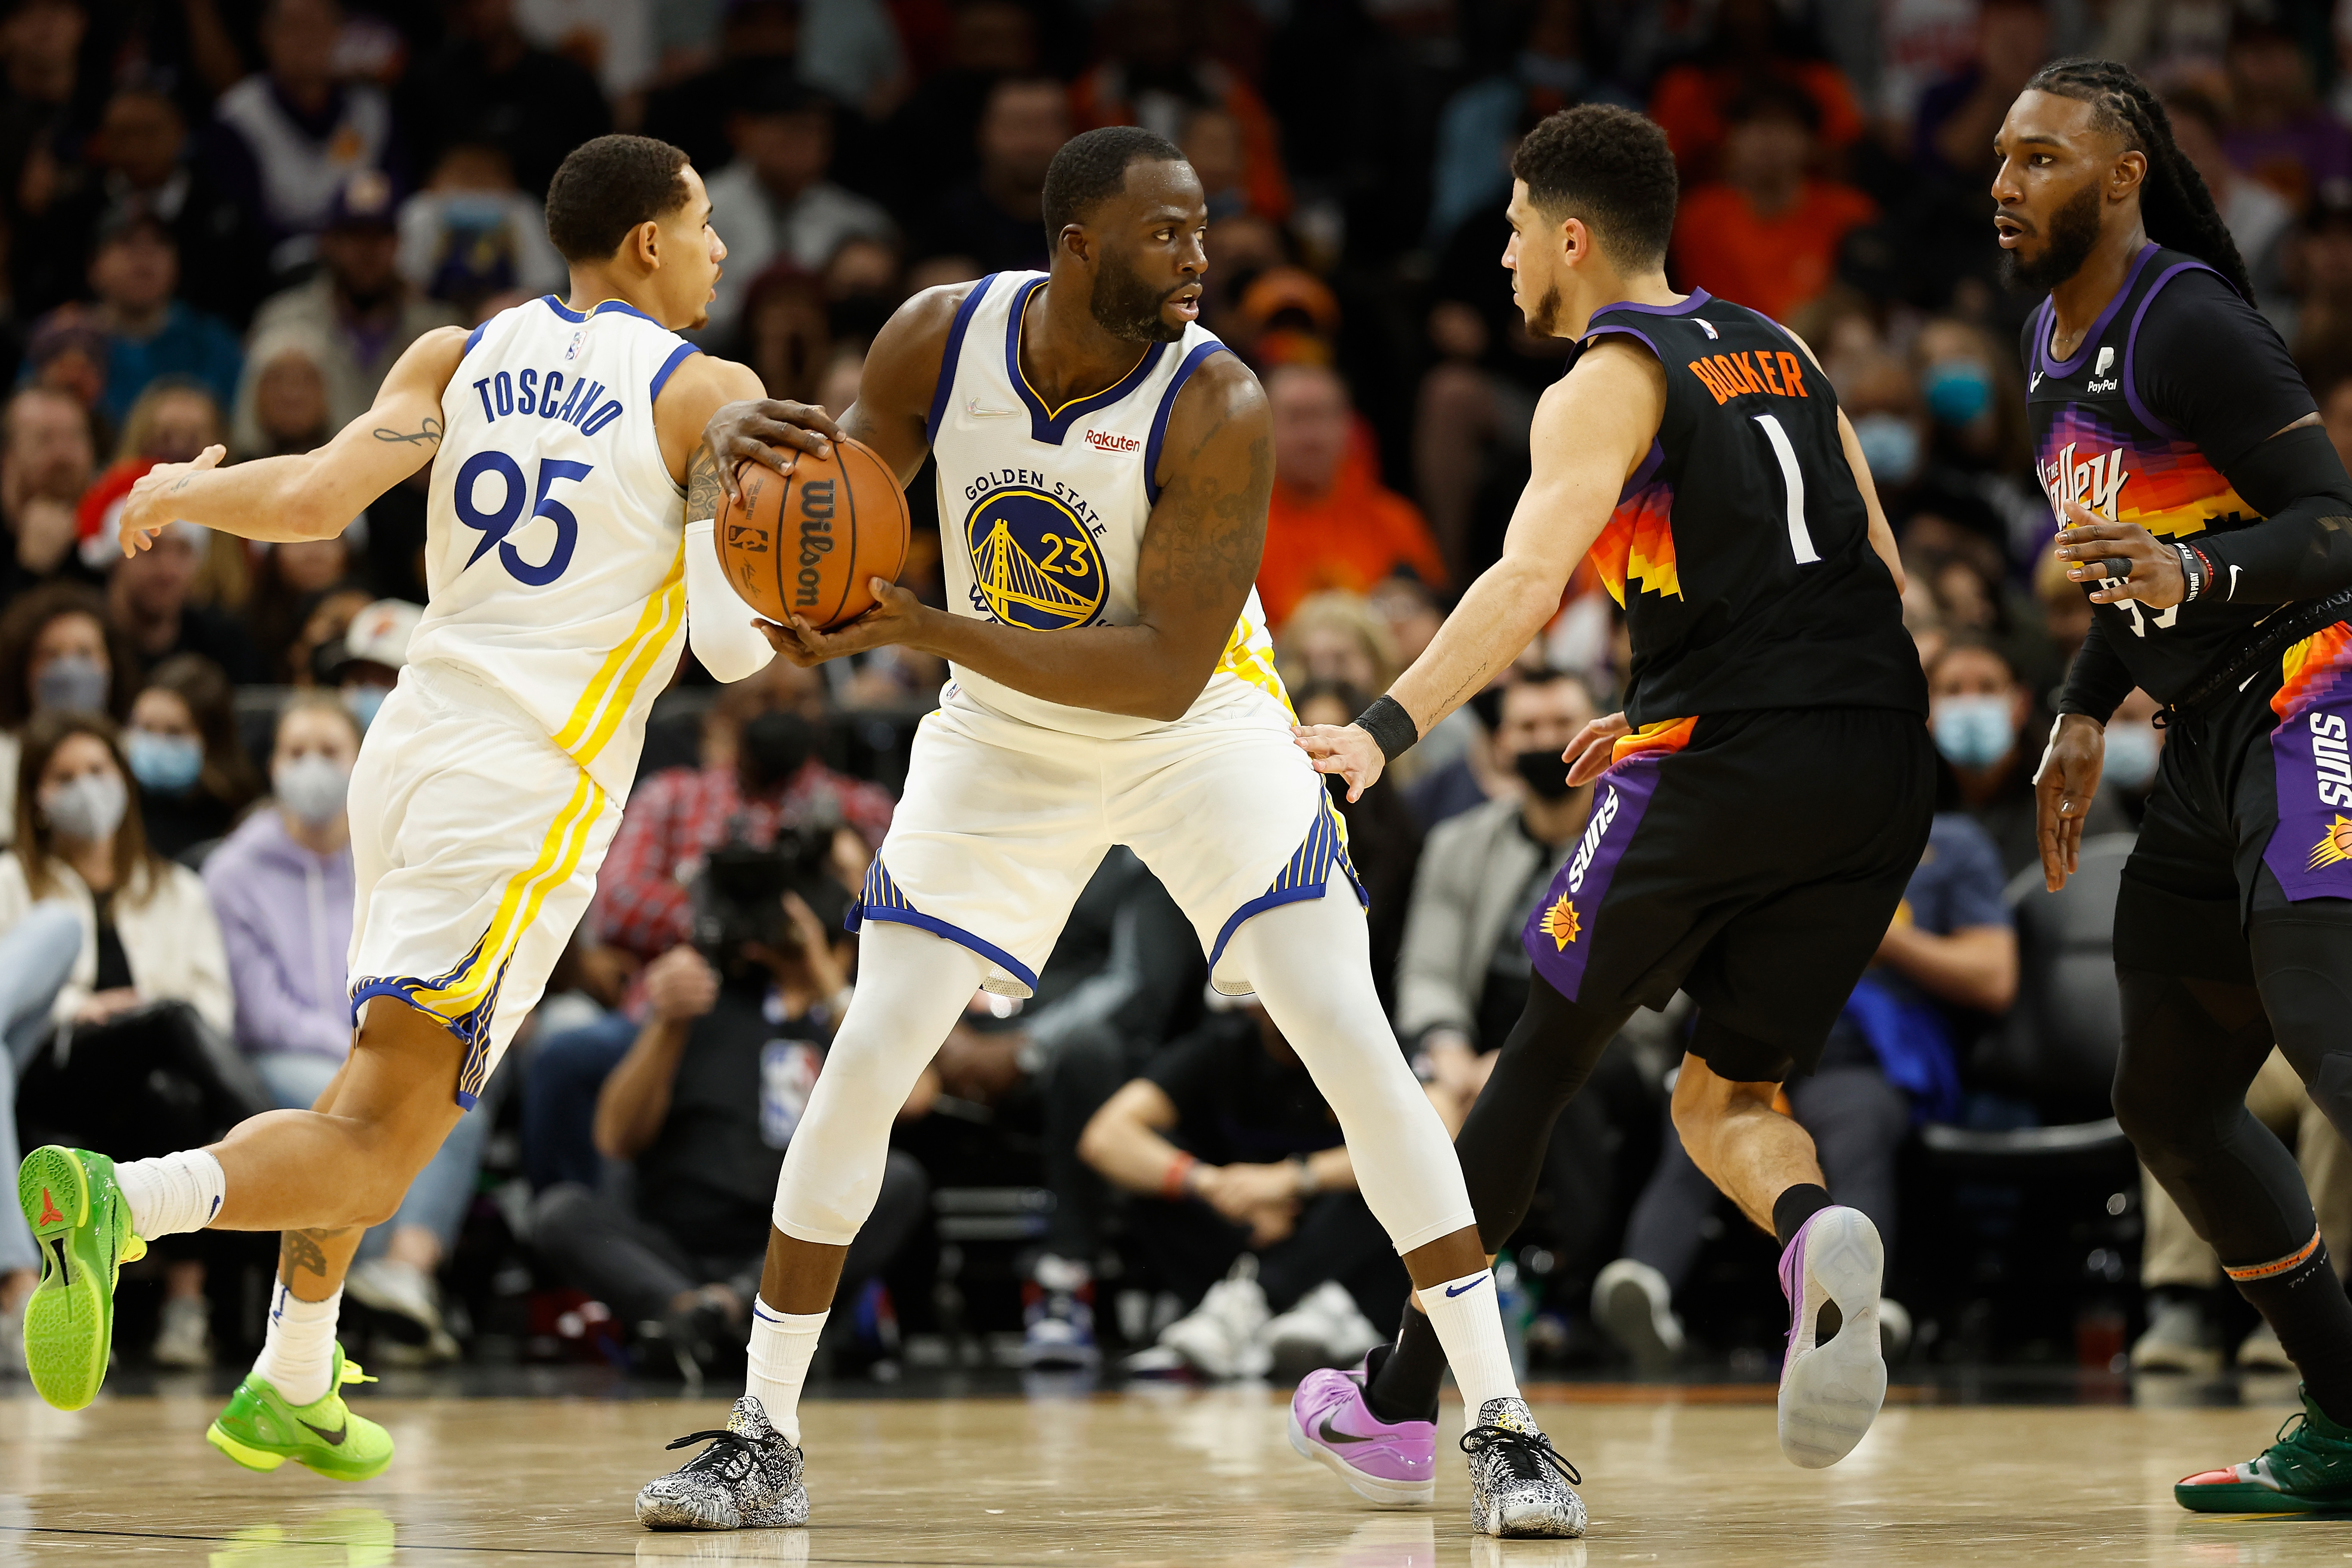 Golden State Warriors Draymond Green looks to pass during a game against the Phoenix Suns